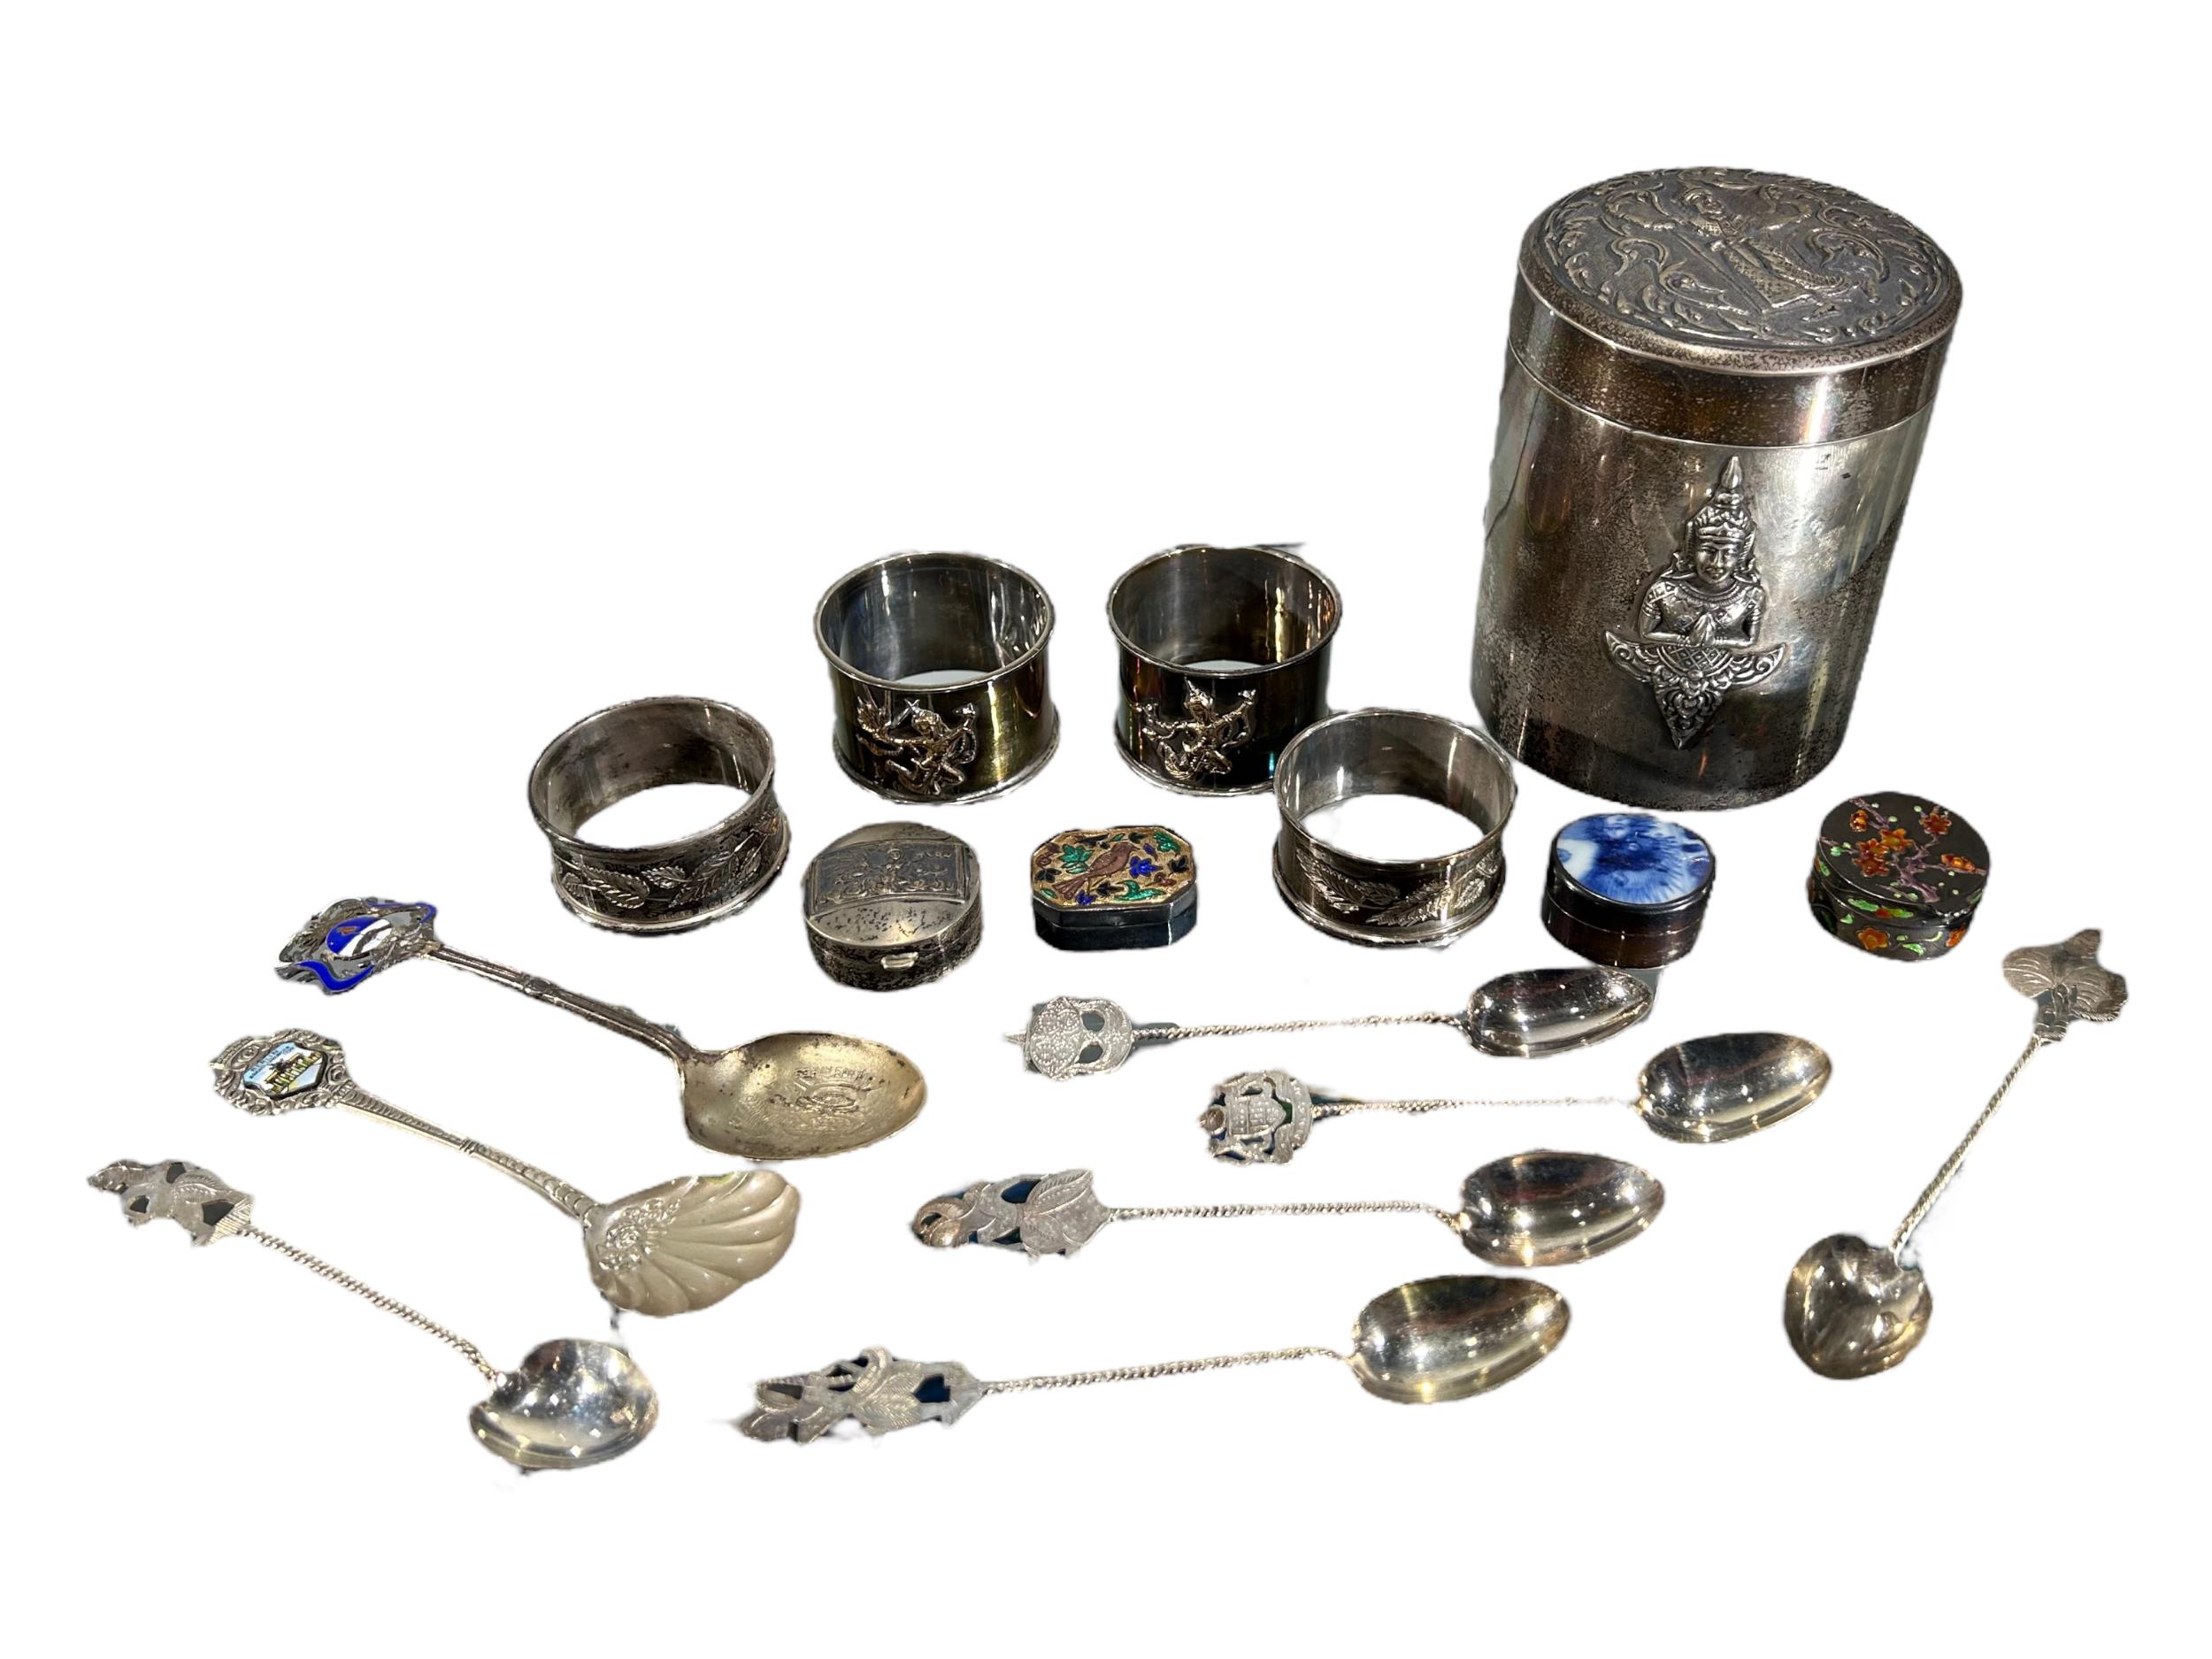 A SIAM STERLING SILVER CANISTER, TOGETHER WITH A COLLECTION OF SILVER NAPKIN RINGS, SPOONS AND